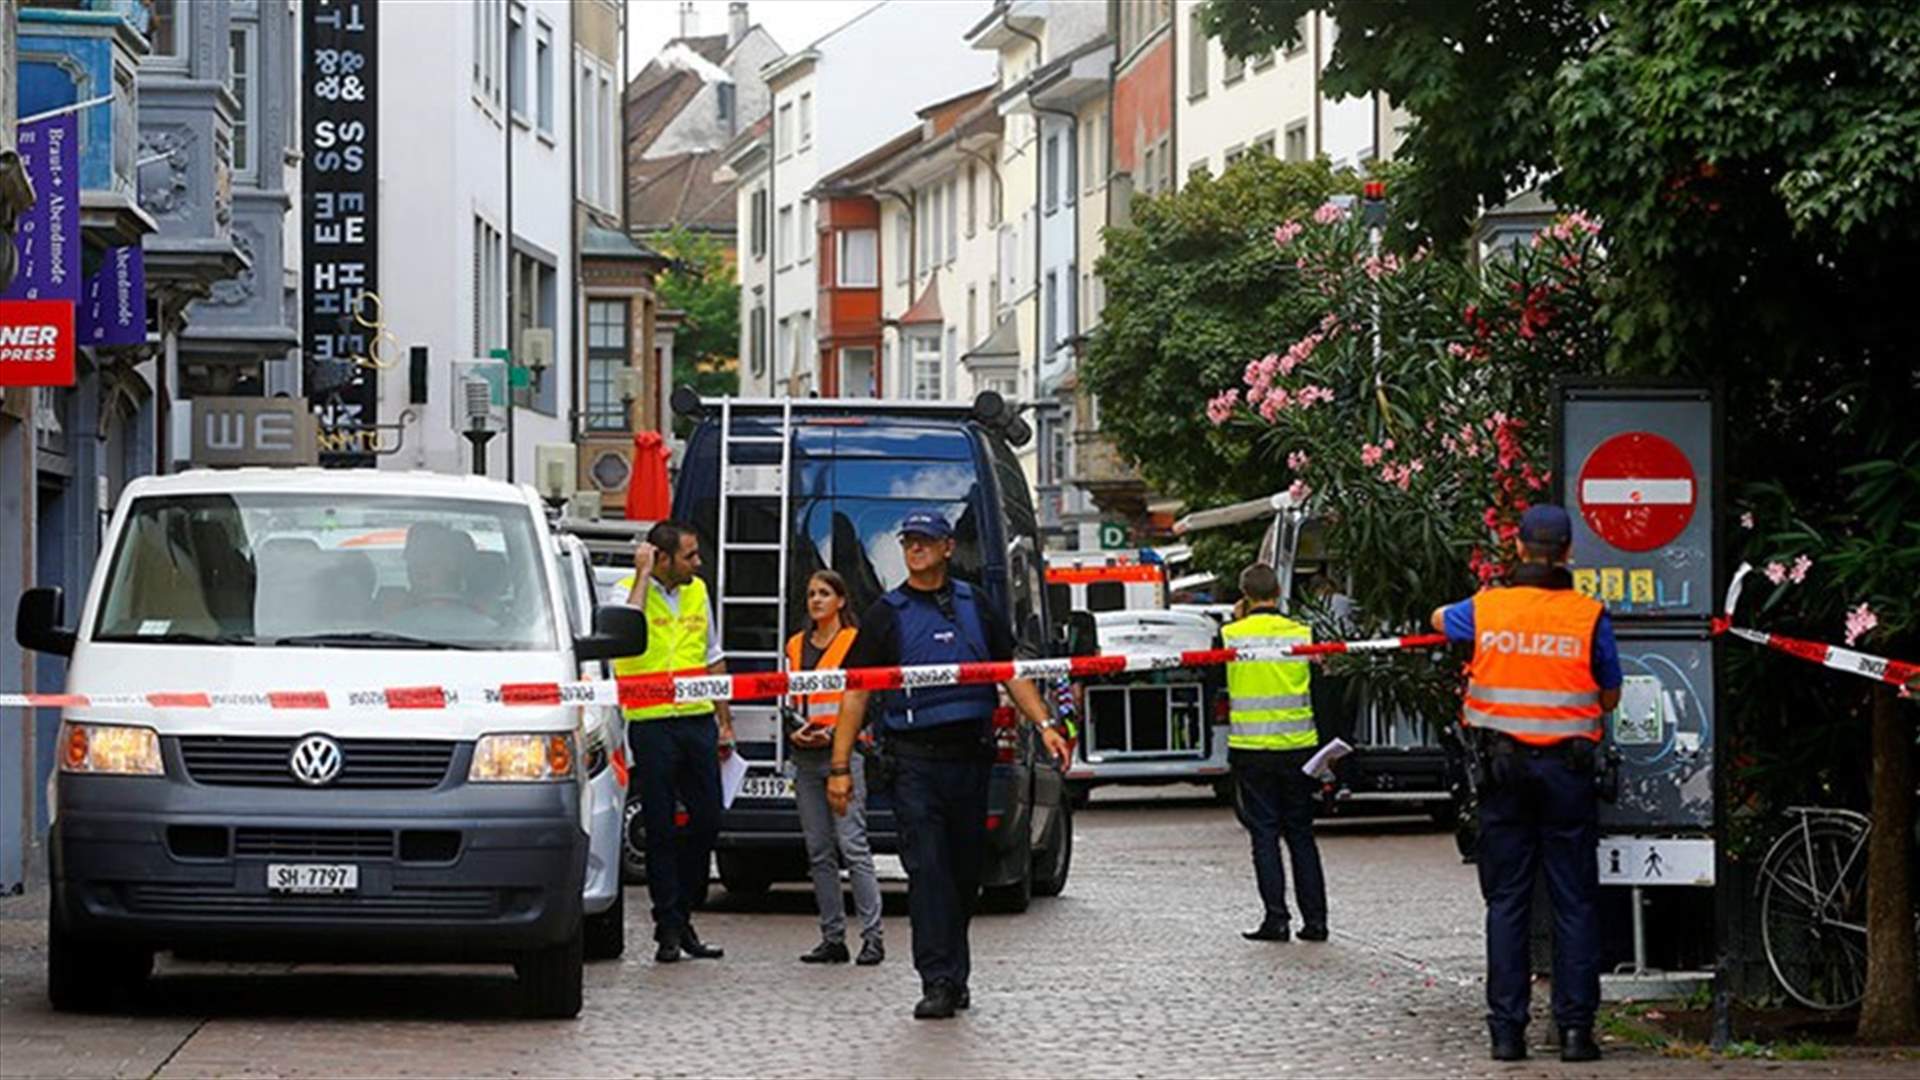 Chainsaw attacker injures five in Swiss town, still on the run